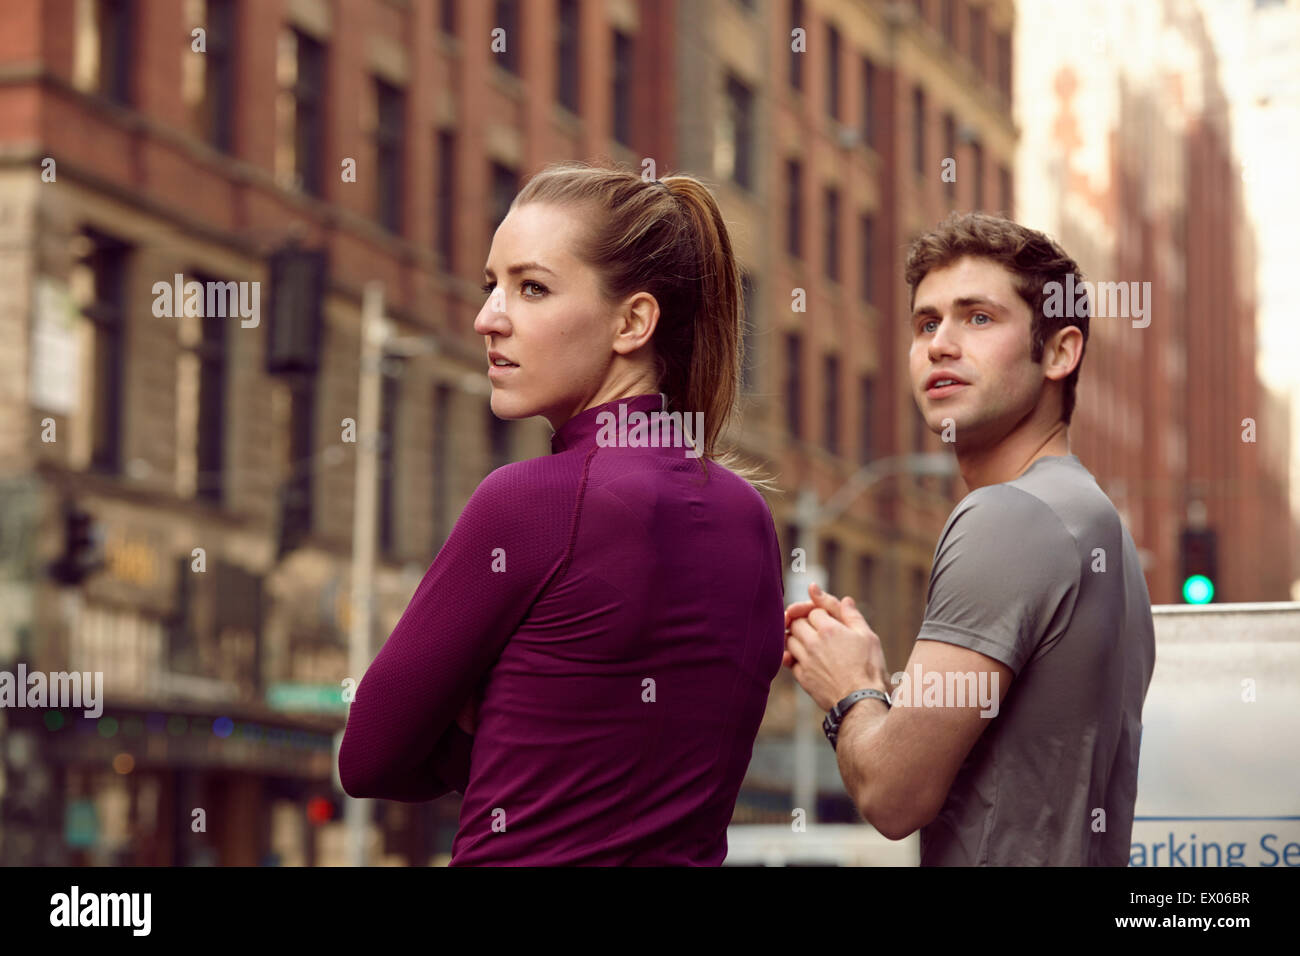 Male and female runners waiting to cross street, Pioneer Square, Seattle, USA Stock Photo